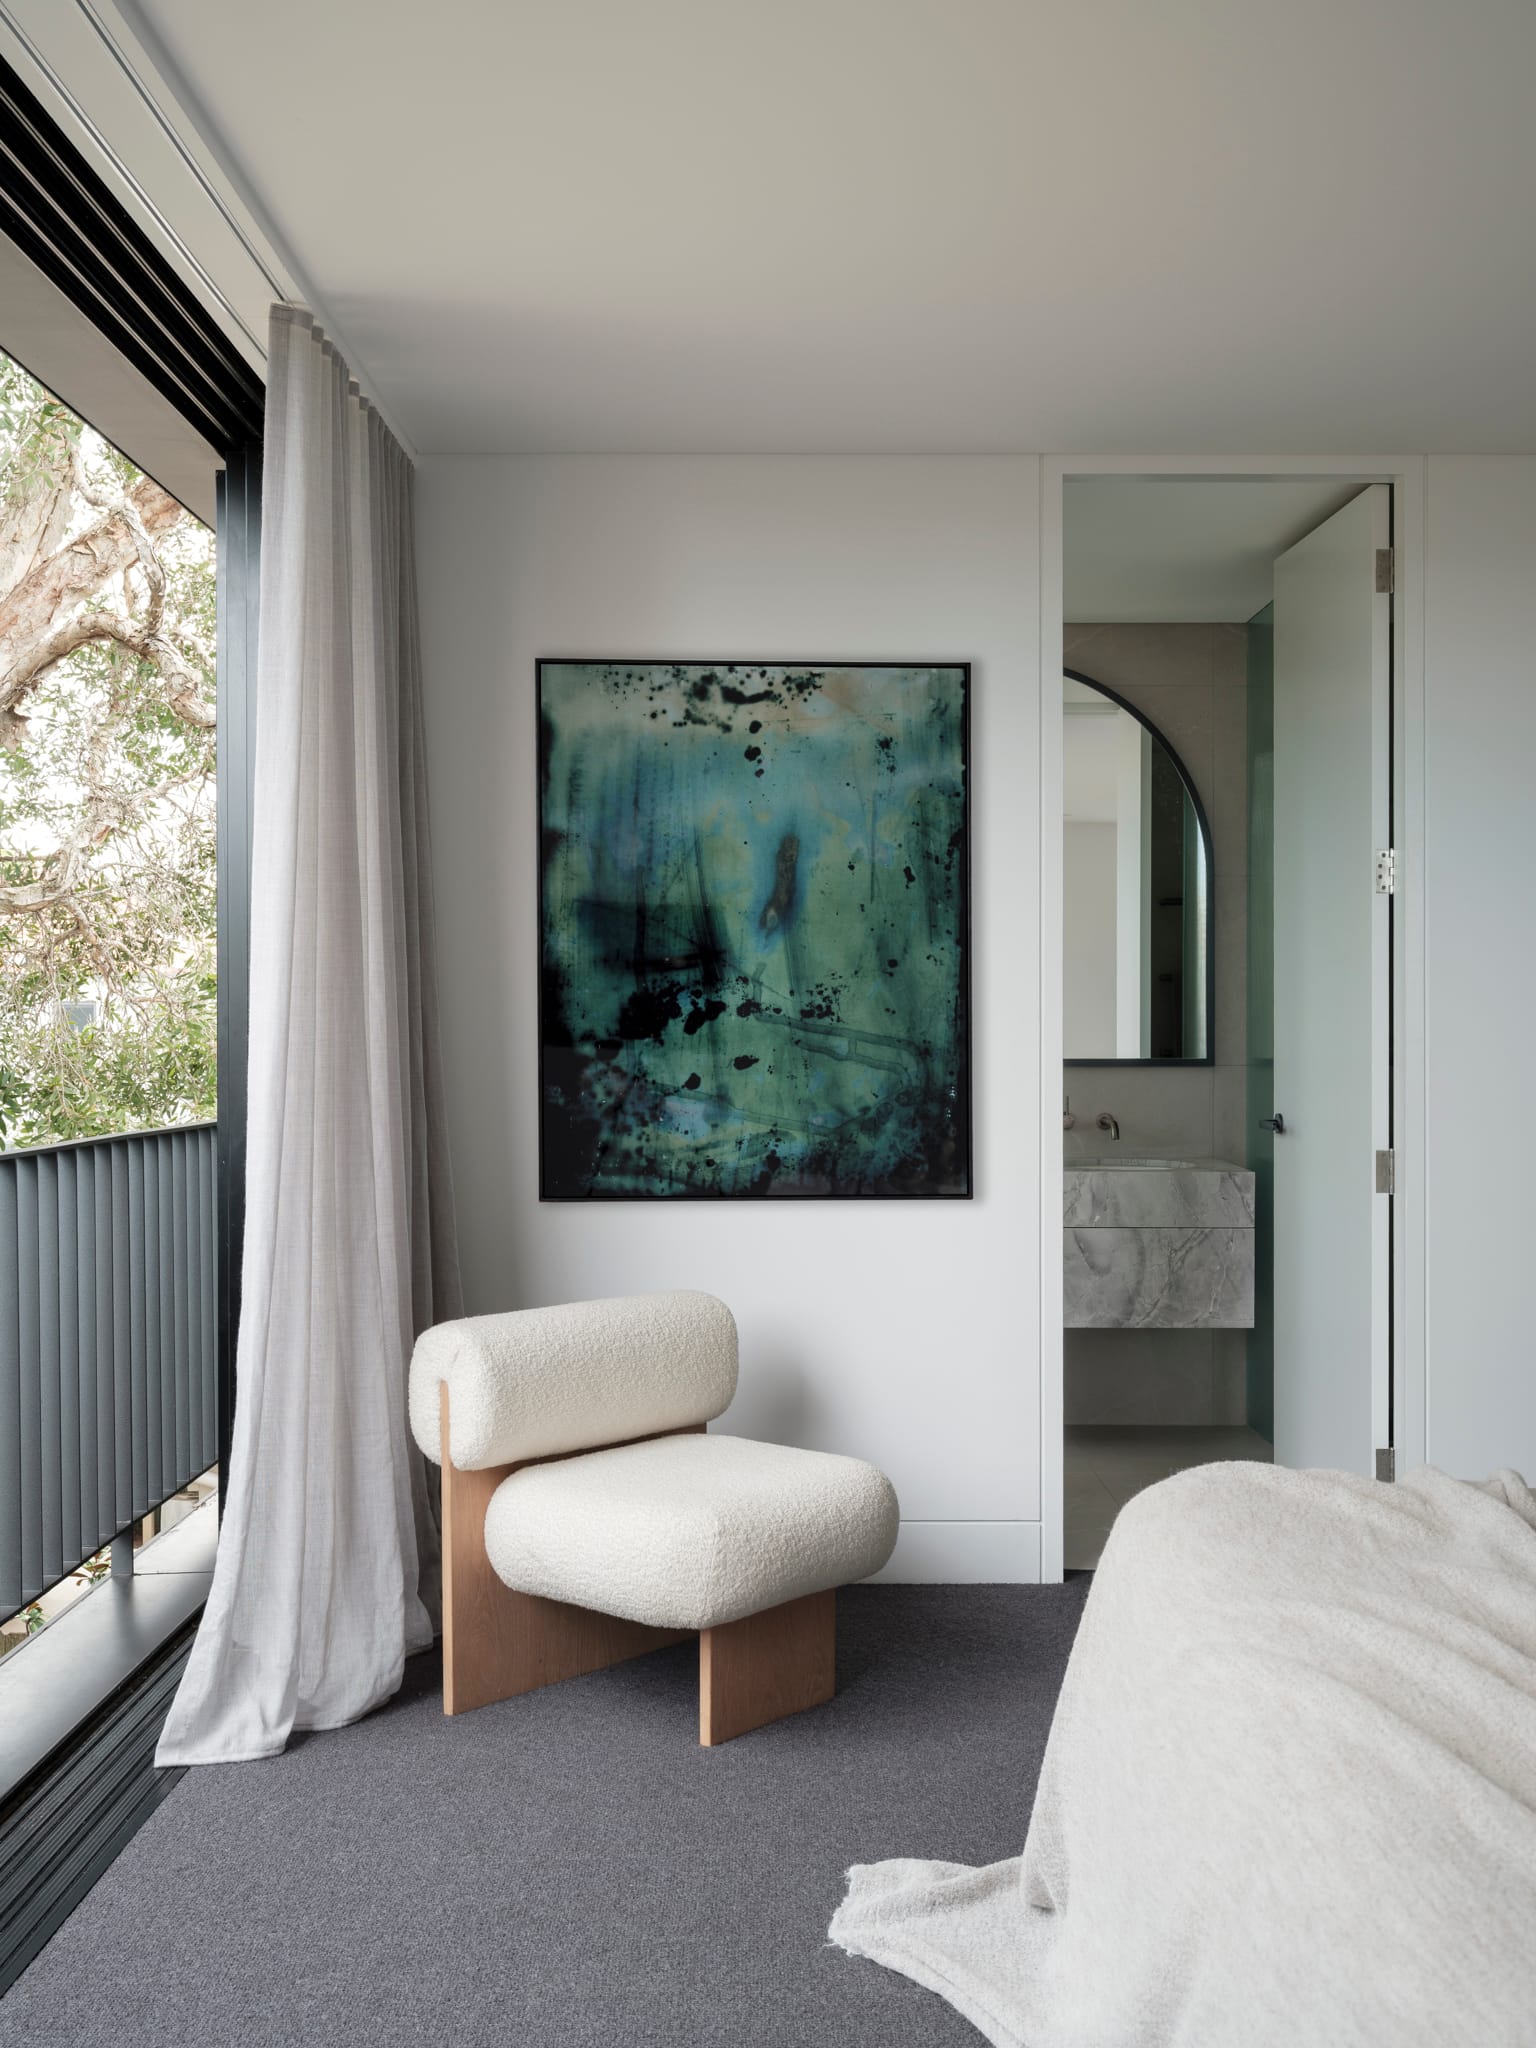 Bellevue House by Carla Middleton Architects. Photography by Tom Ferguson. Bedroom with grey carpet and white walls. White armchair. Balcony to the left and bathroom to the right. 